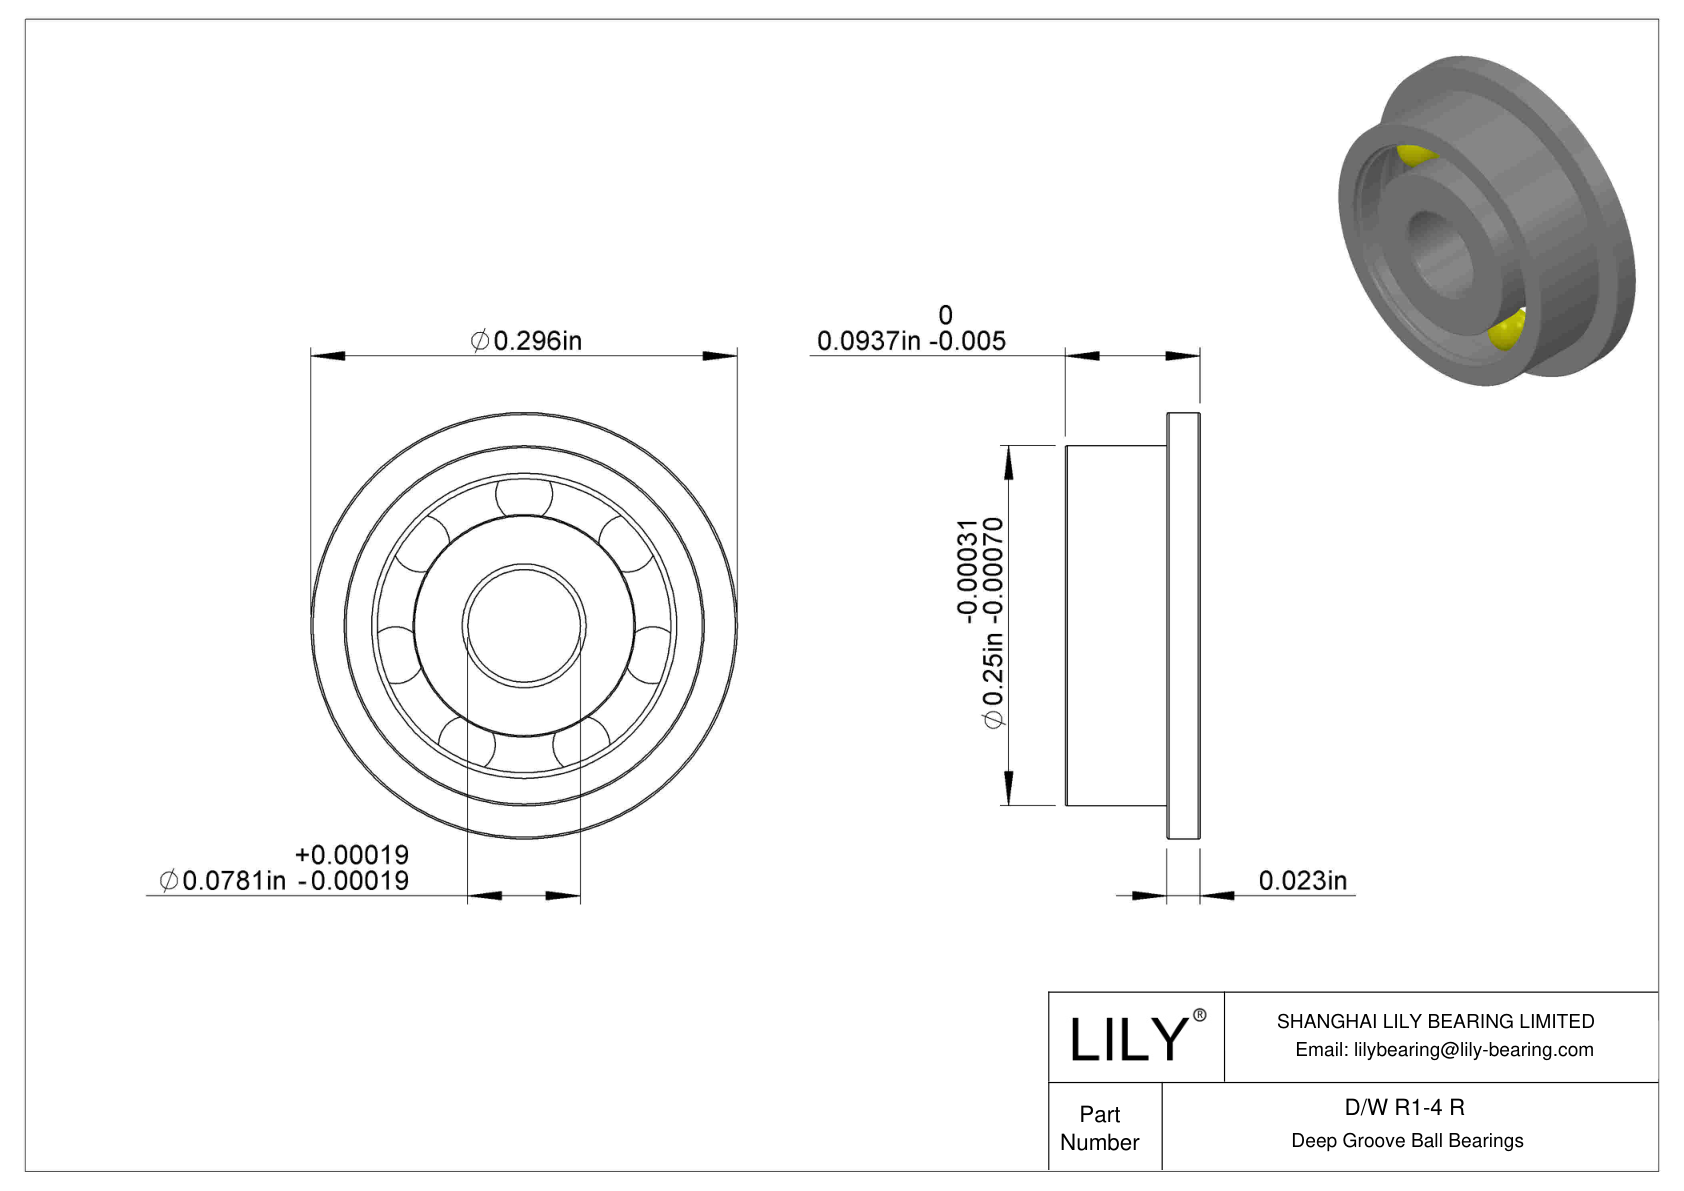 D/W R1-4 R Flanged Ball Bearings cad drawing